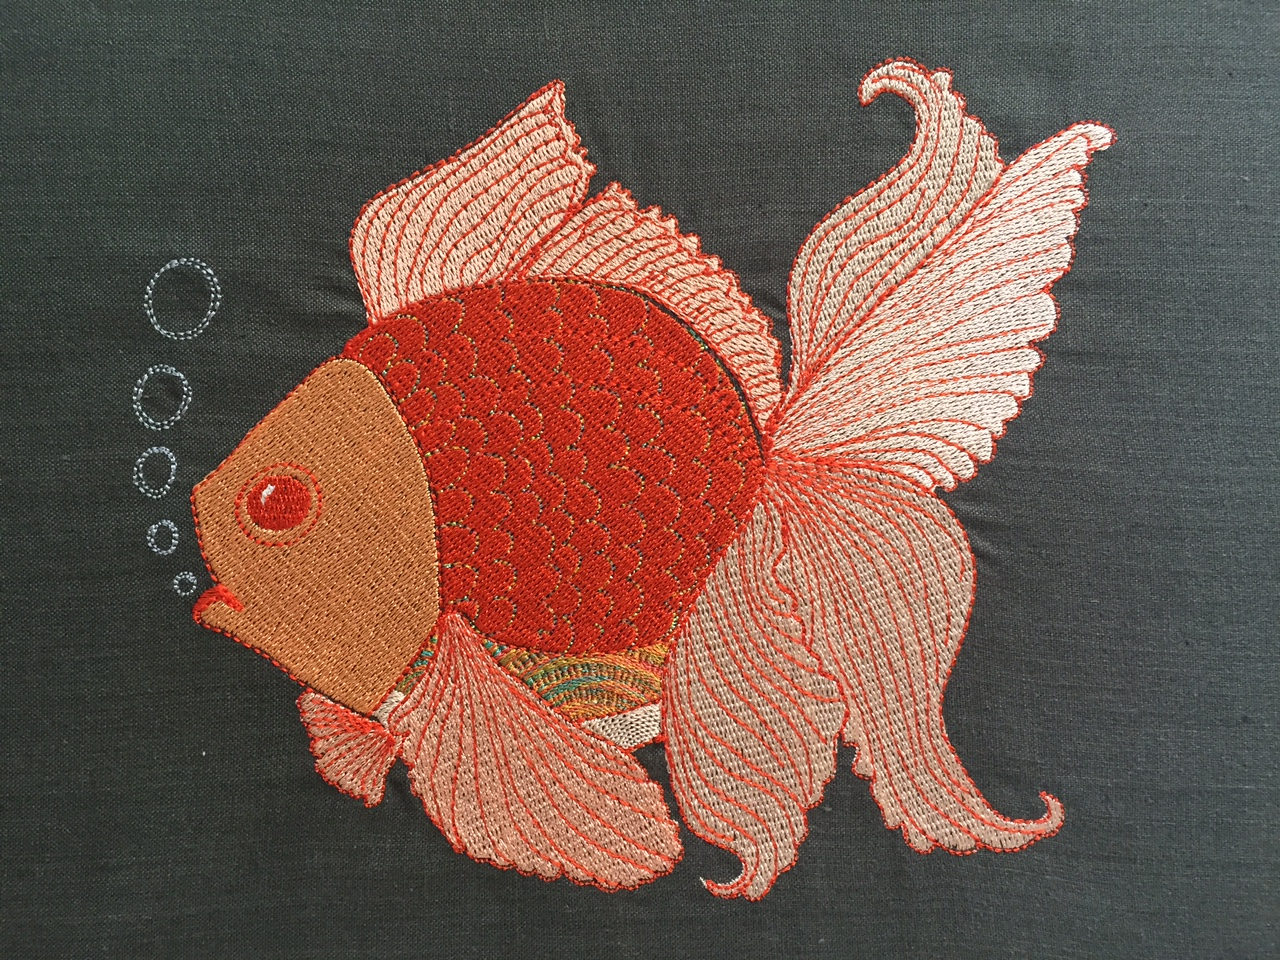 Free Machine Embroidery Patterns To Download Machine Embroidery Angel Fish